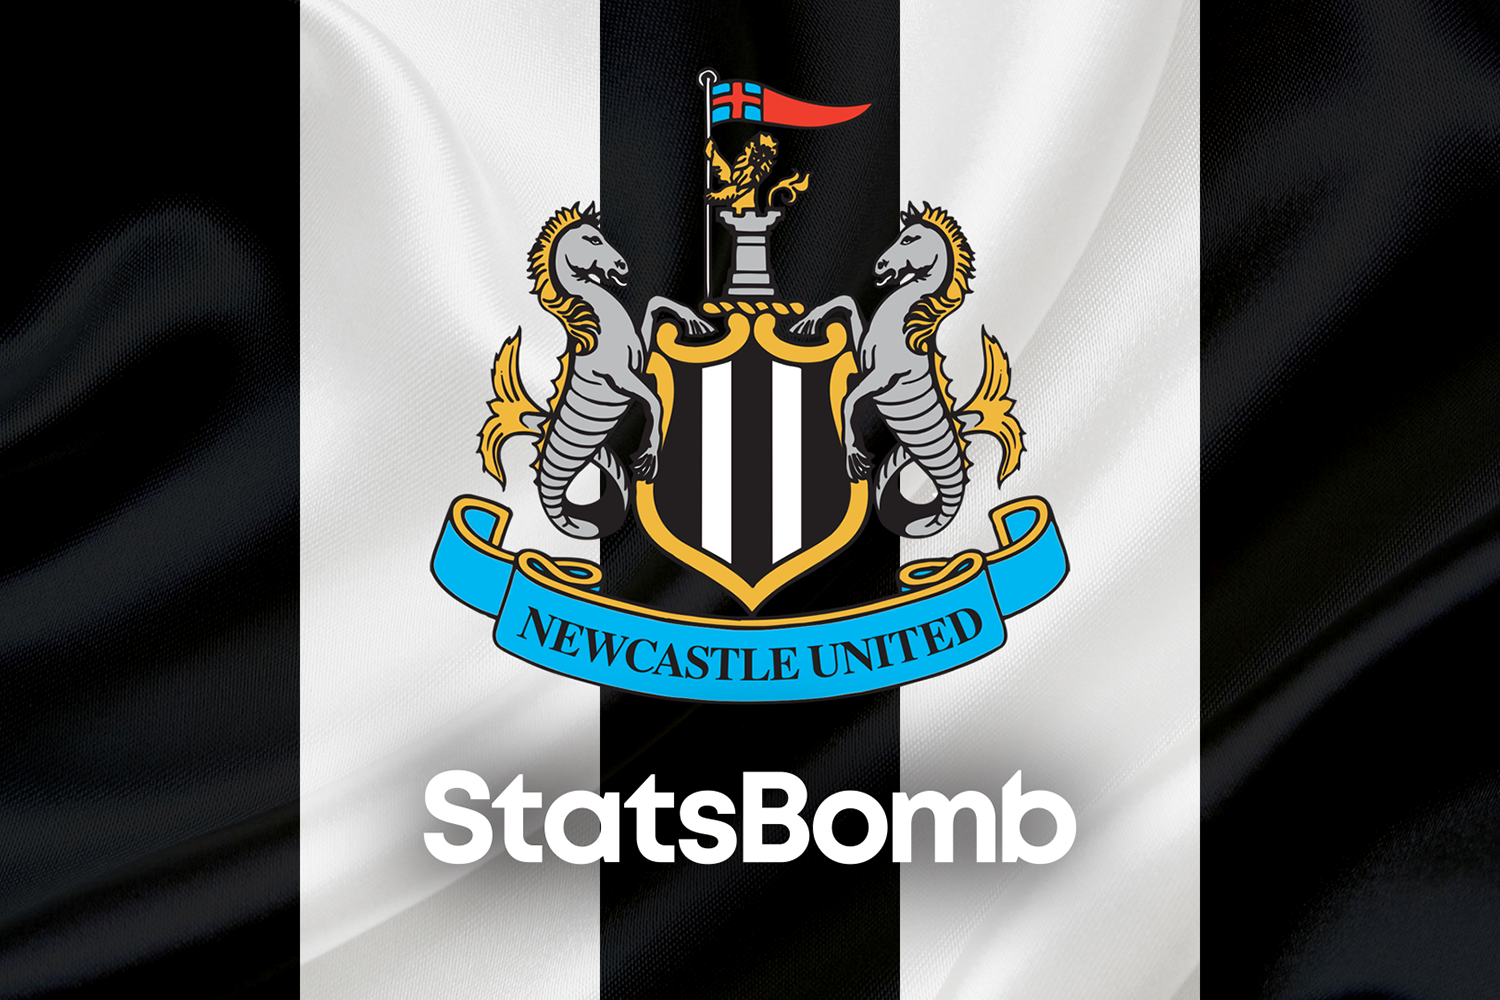 StatsBomb Sign Multi-Year Deal With Newcastle United